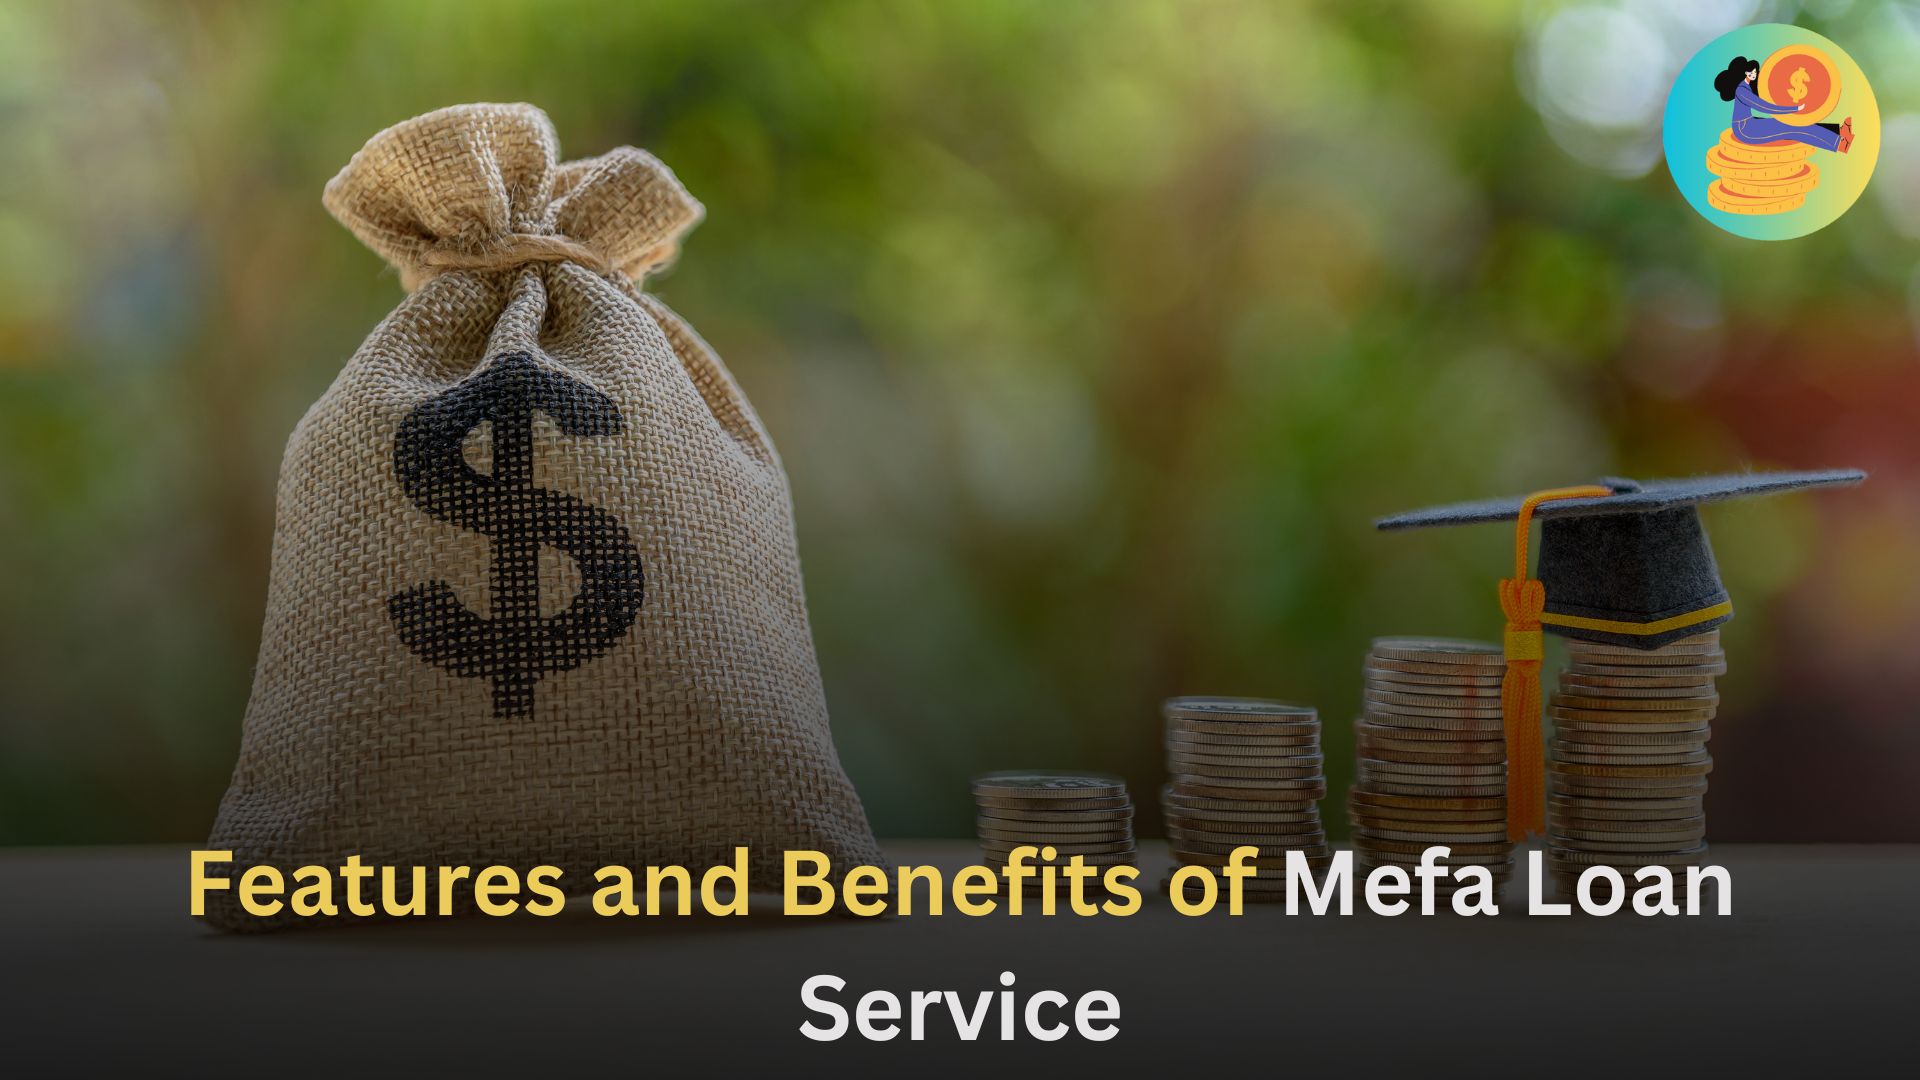 Features and Benefits of Mefa Loan Service